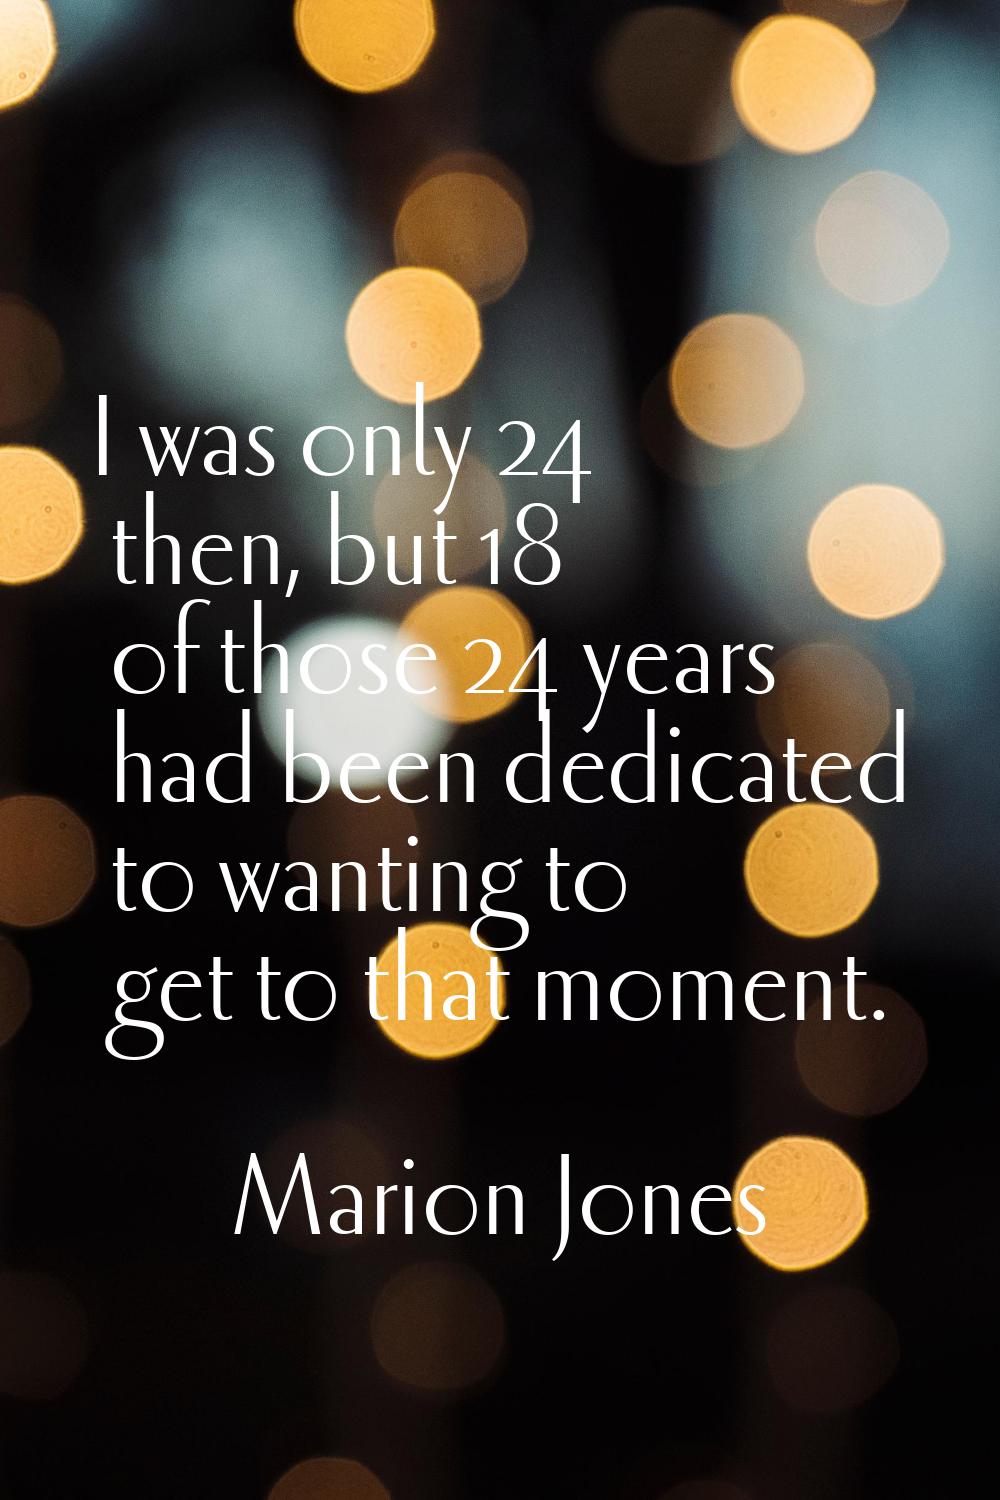 I was only 24 then, but 18 of those 24 years had been dedicated to wanting to get to that moment.